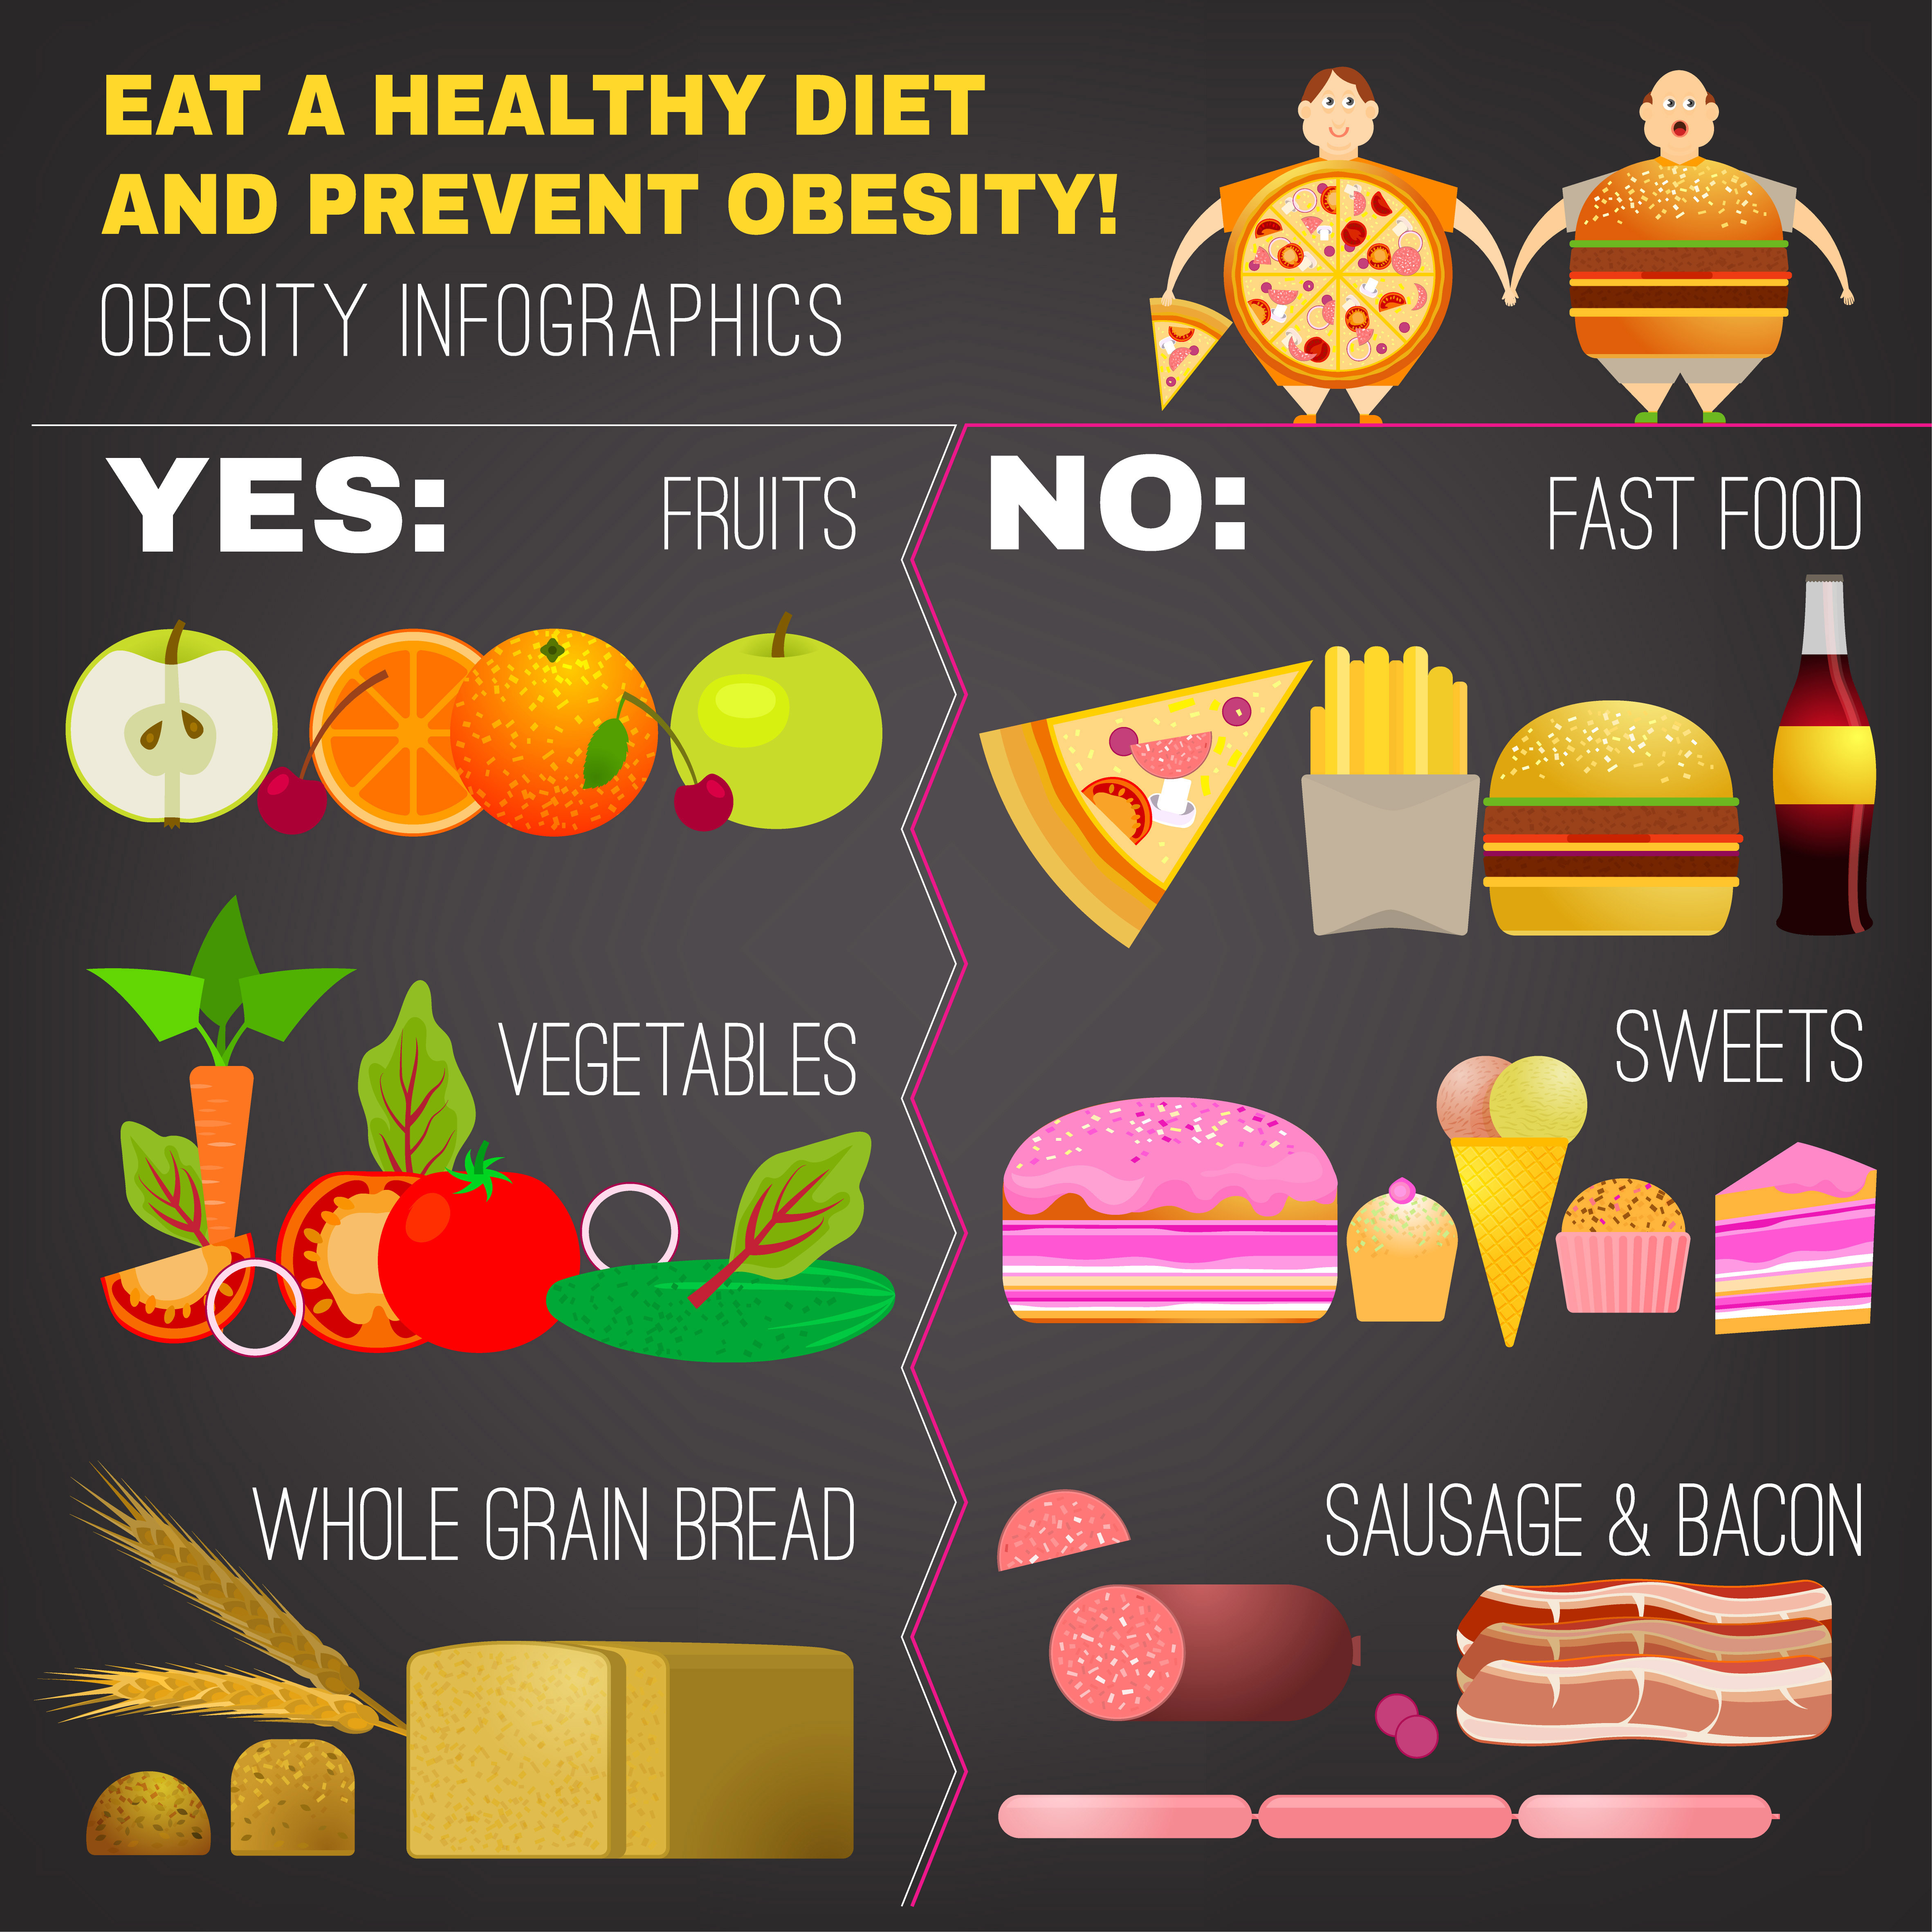 How to eat a healthy diet